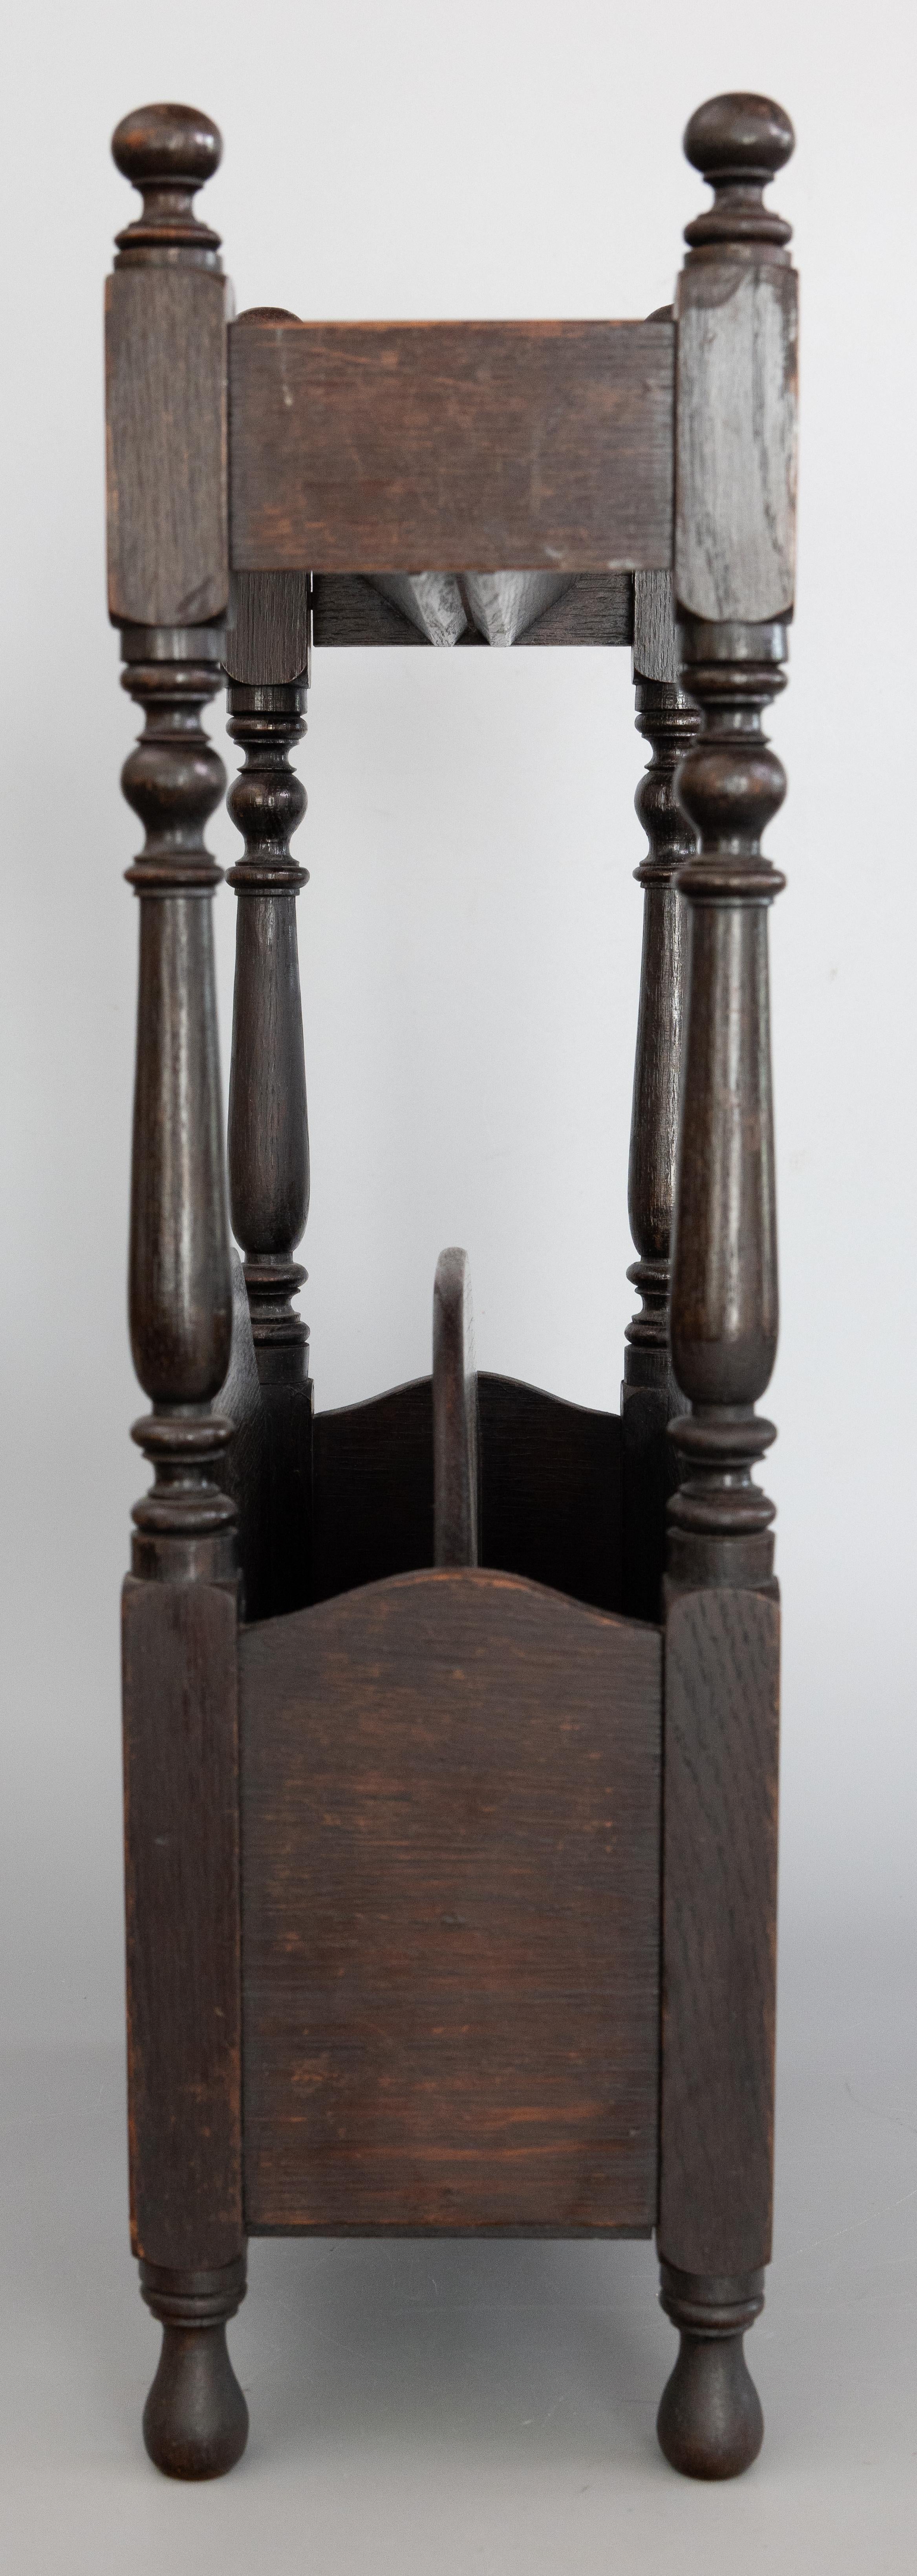 20th Century Antique English Carved Oak Library Book Trough and Magazine Rack Stand, c. 1910 For Sale